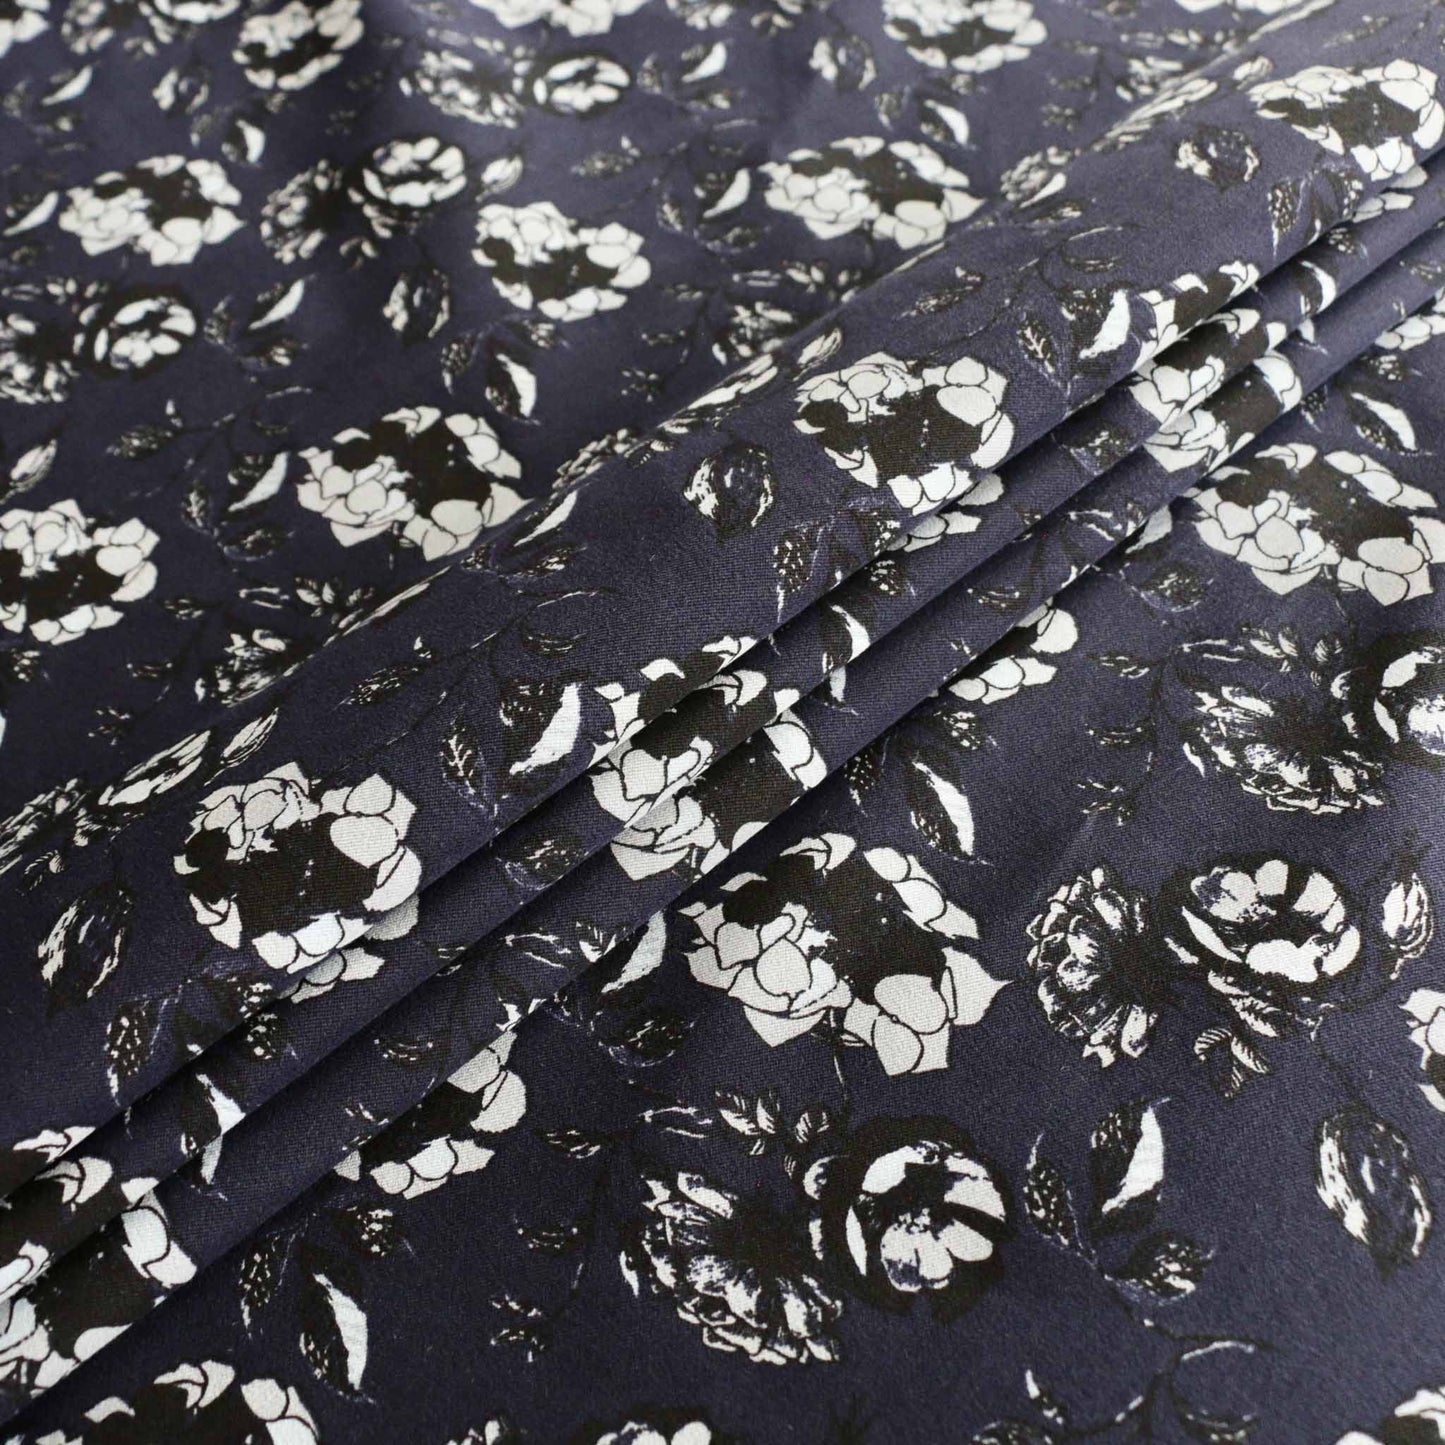 folded navy cotton sateen dressmaking fabric with white and black floral print